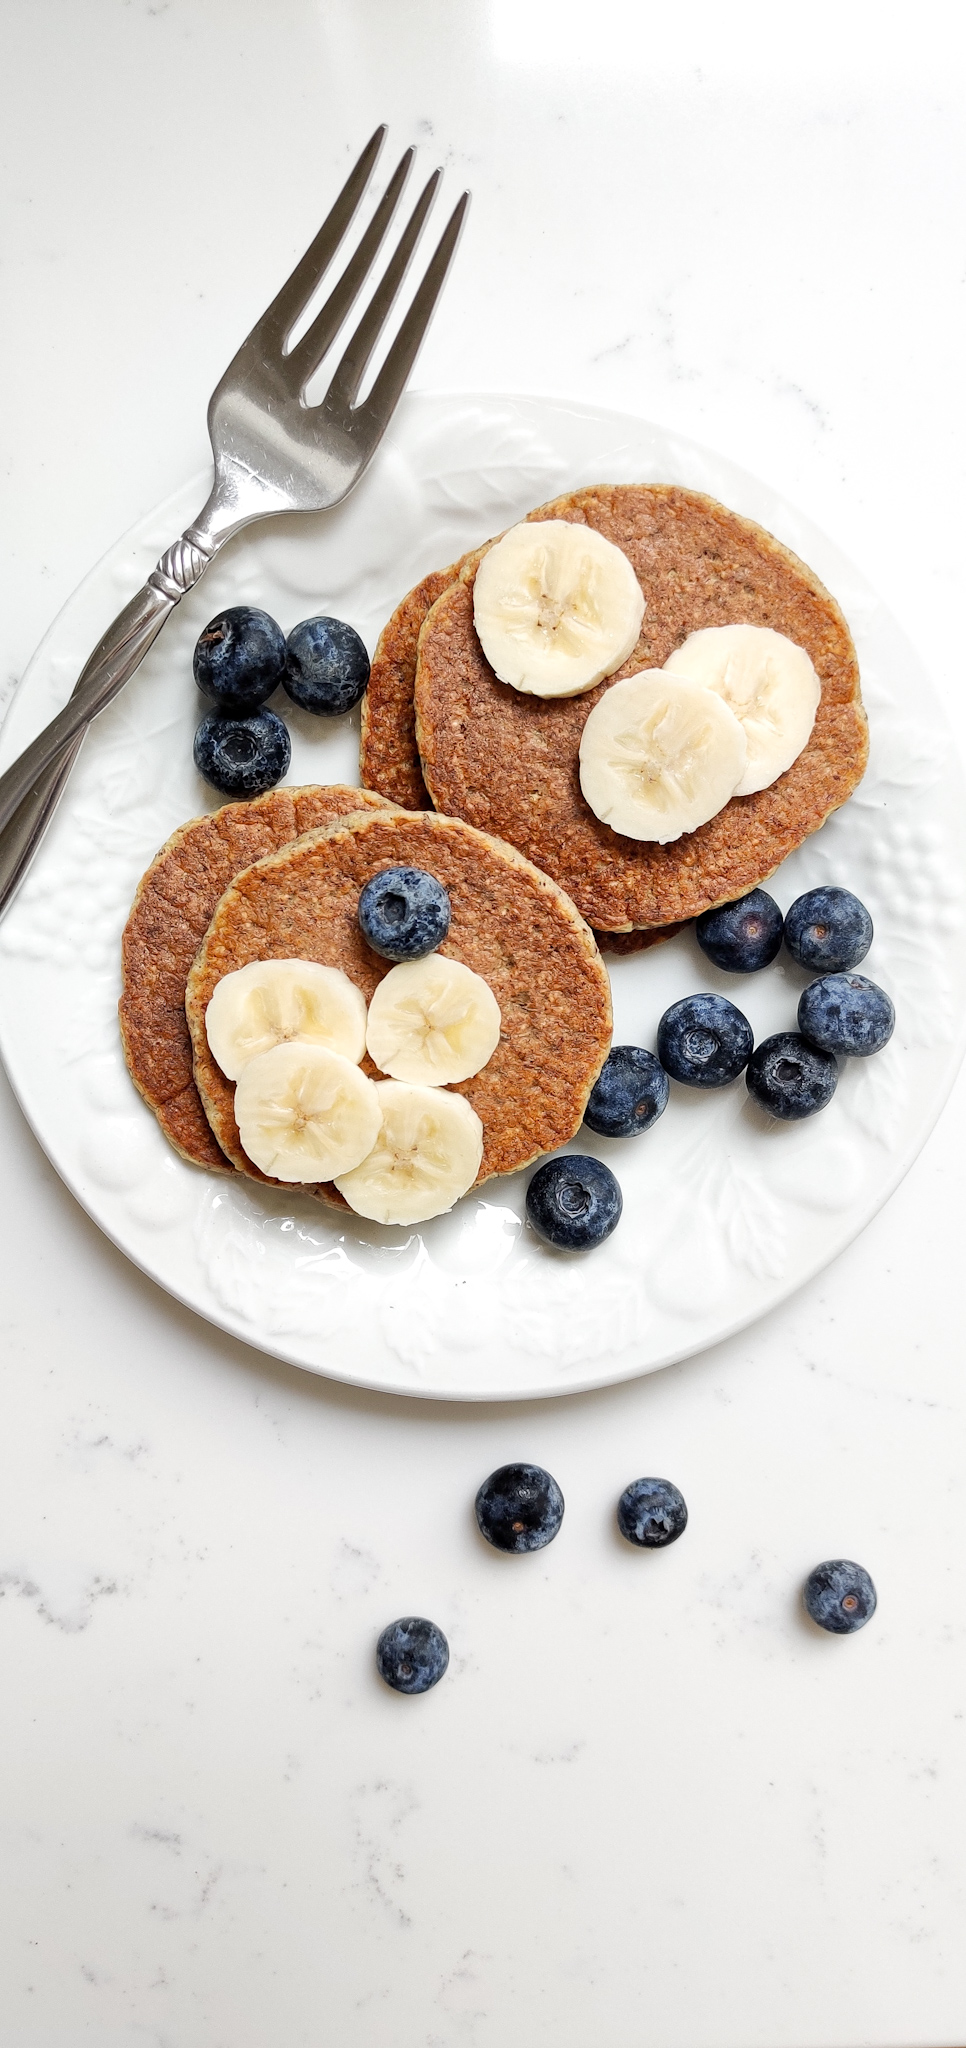 All Oat Pancakes